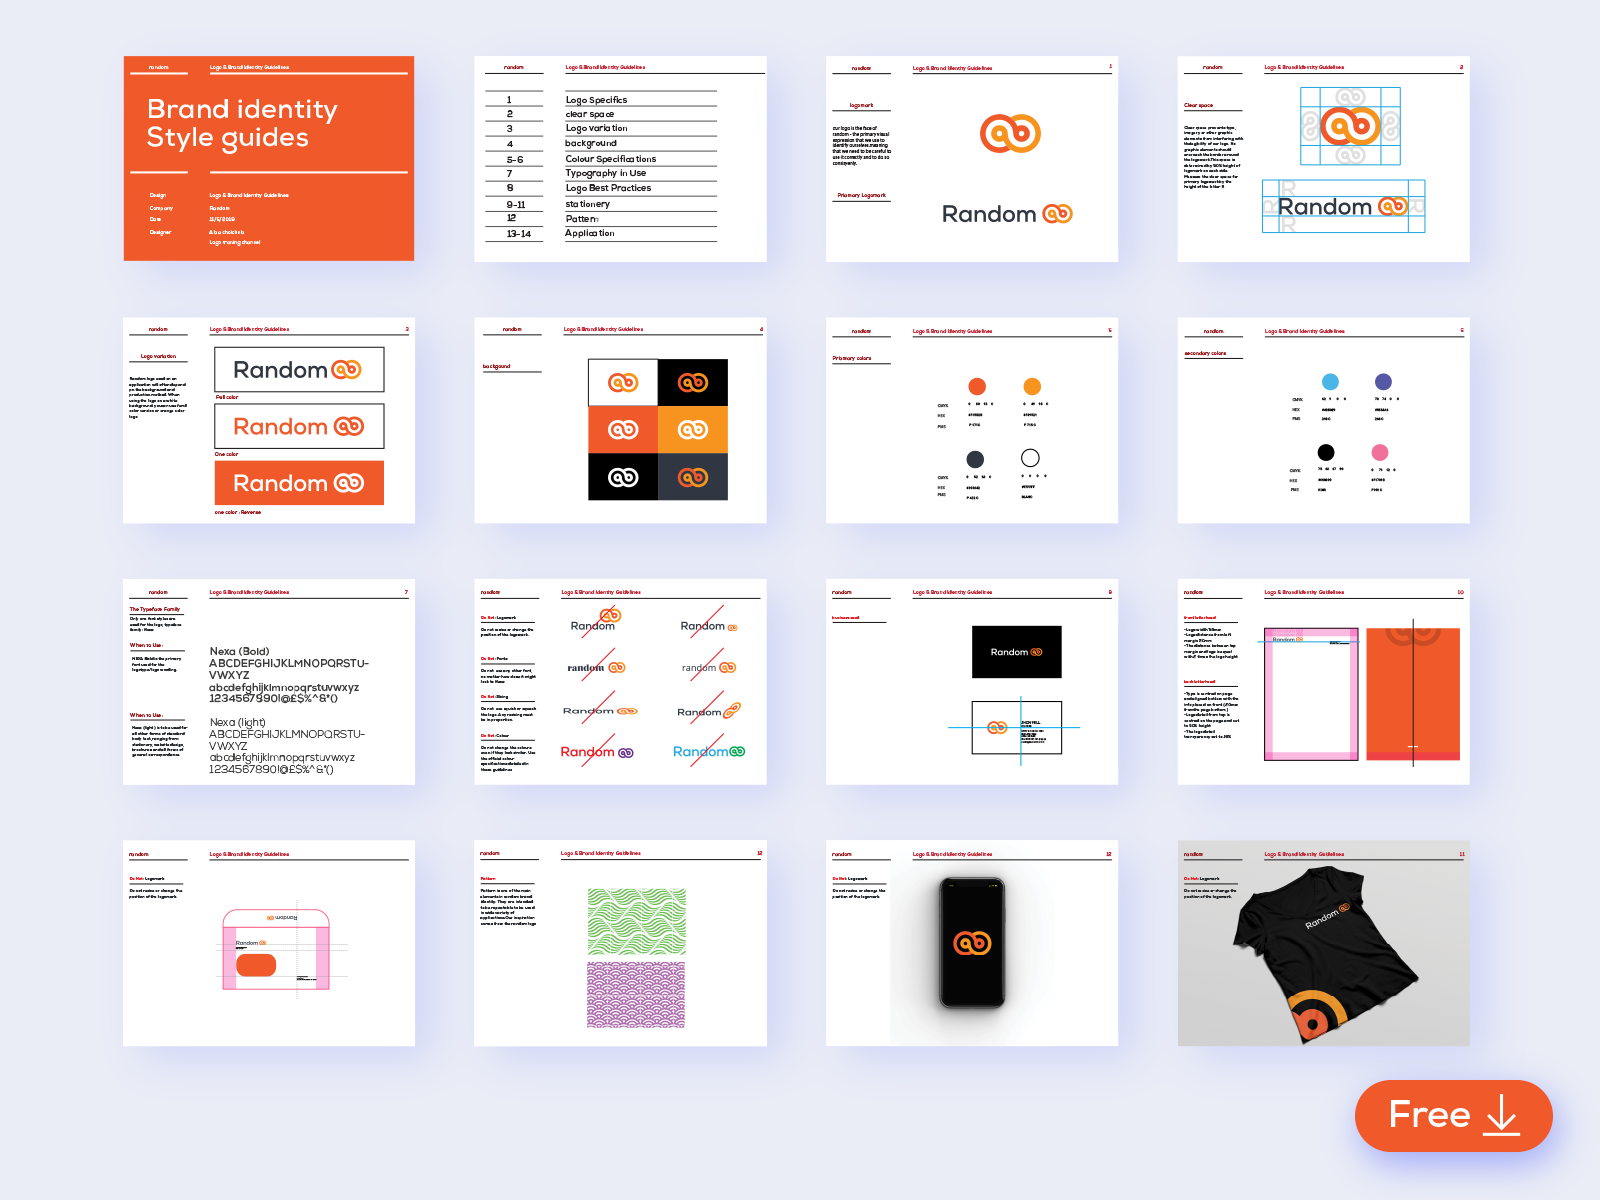 Free Brand Identity Guidelines Template By Alaa Choichnia On Dribbble